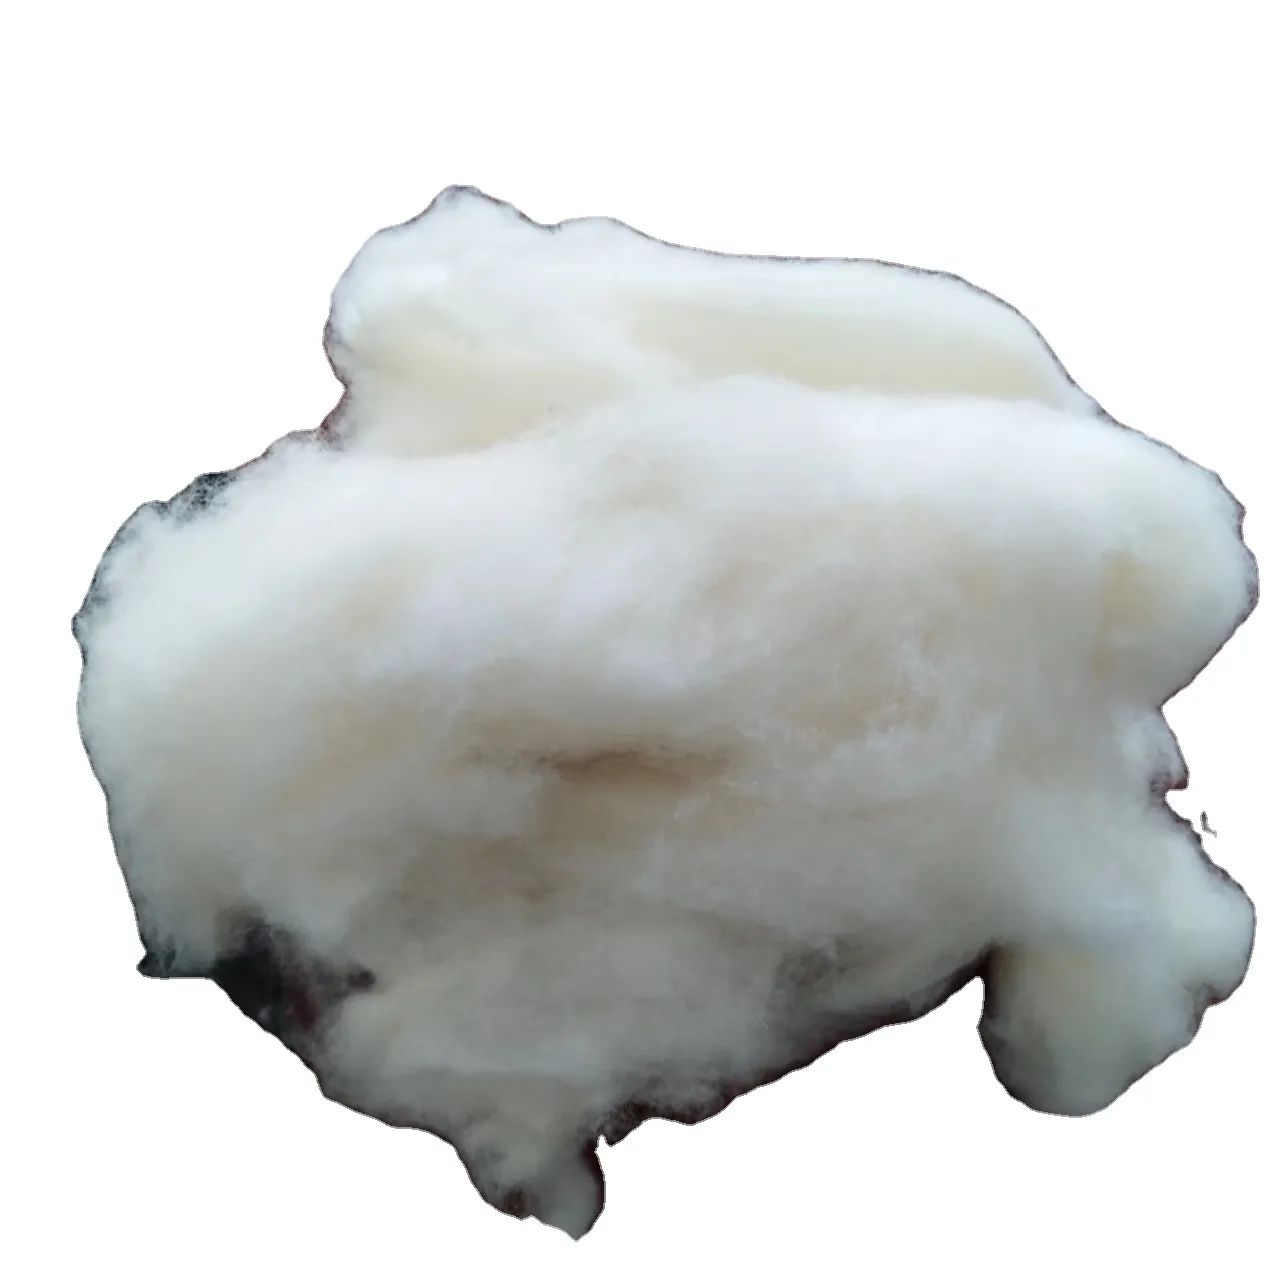 Fiber 100 Sheep Wool Waste for Carpet and Fertilizer Natural Free Sample Cheap Carded Sheep Wool DHL White FEDEX Time Mic TNT